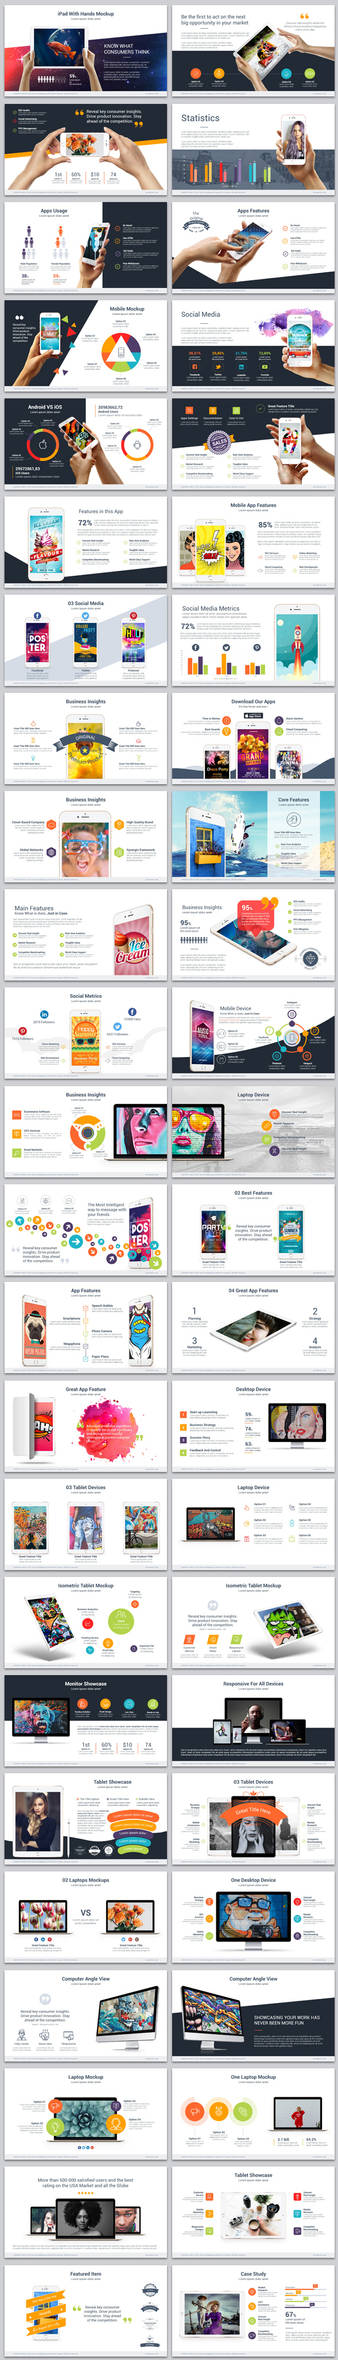 Powerpoint Devices mock-up templates